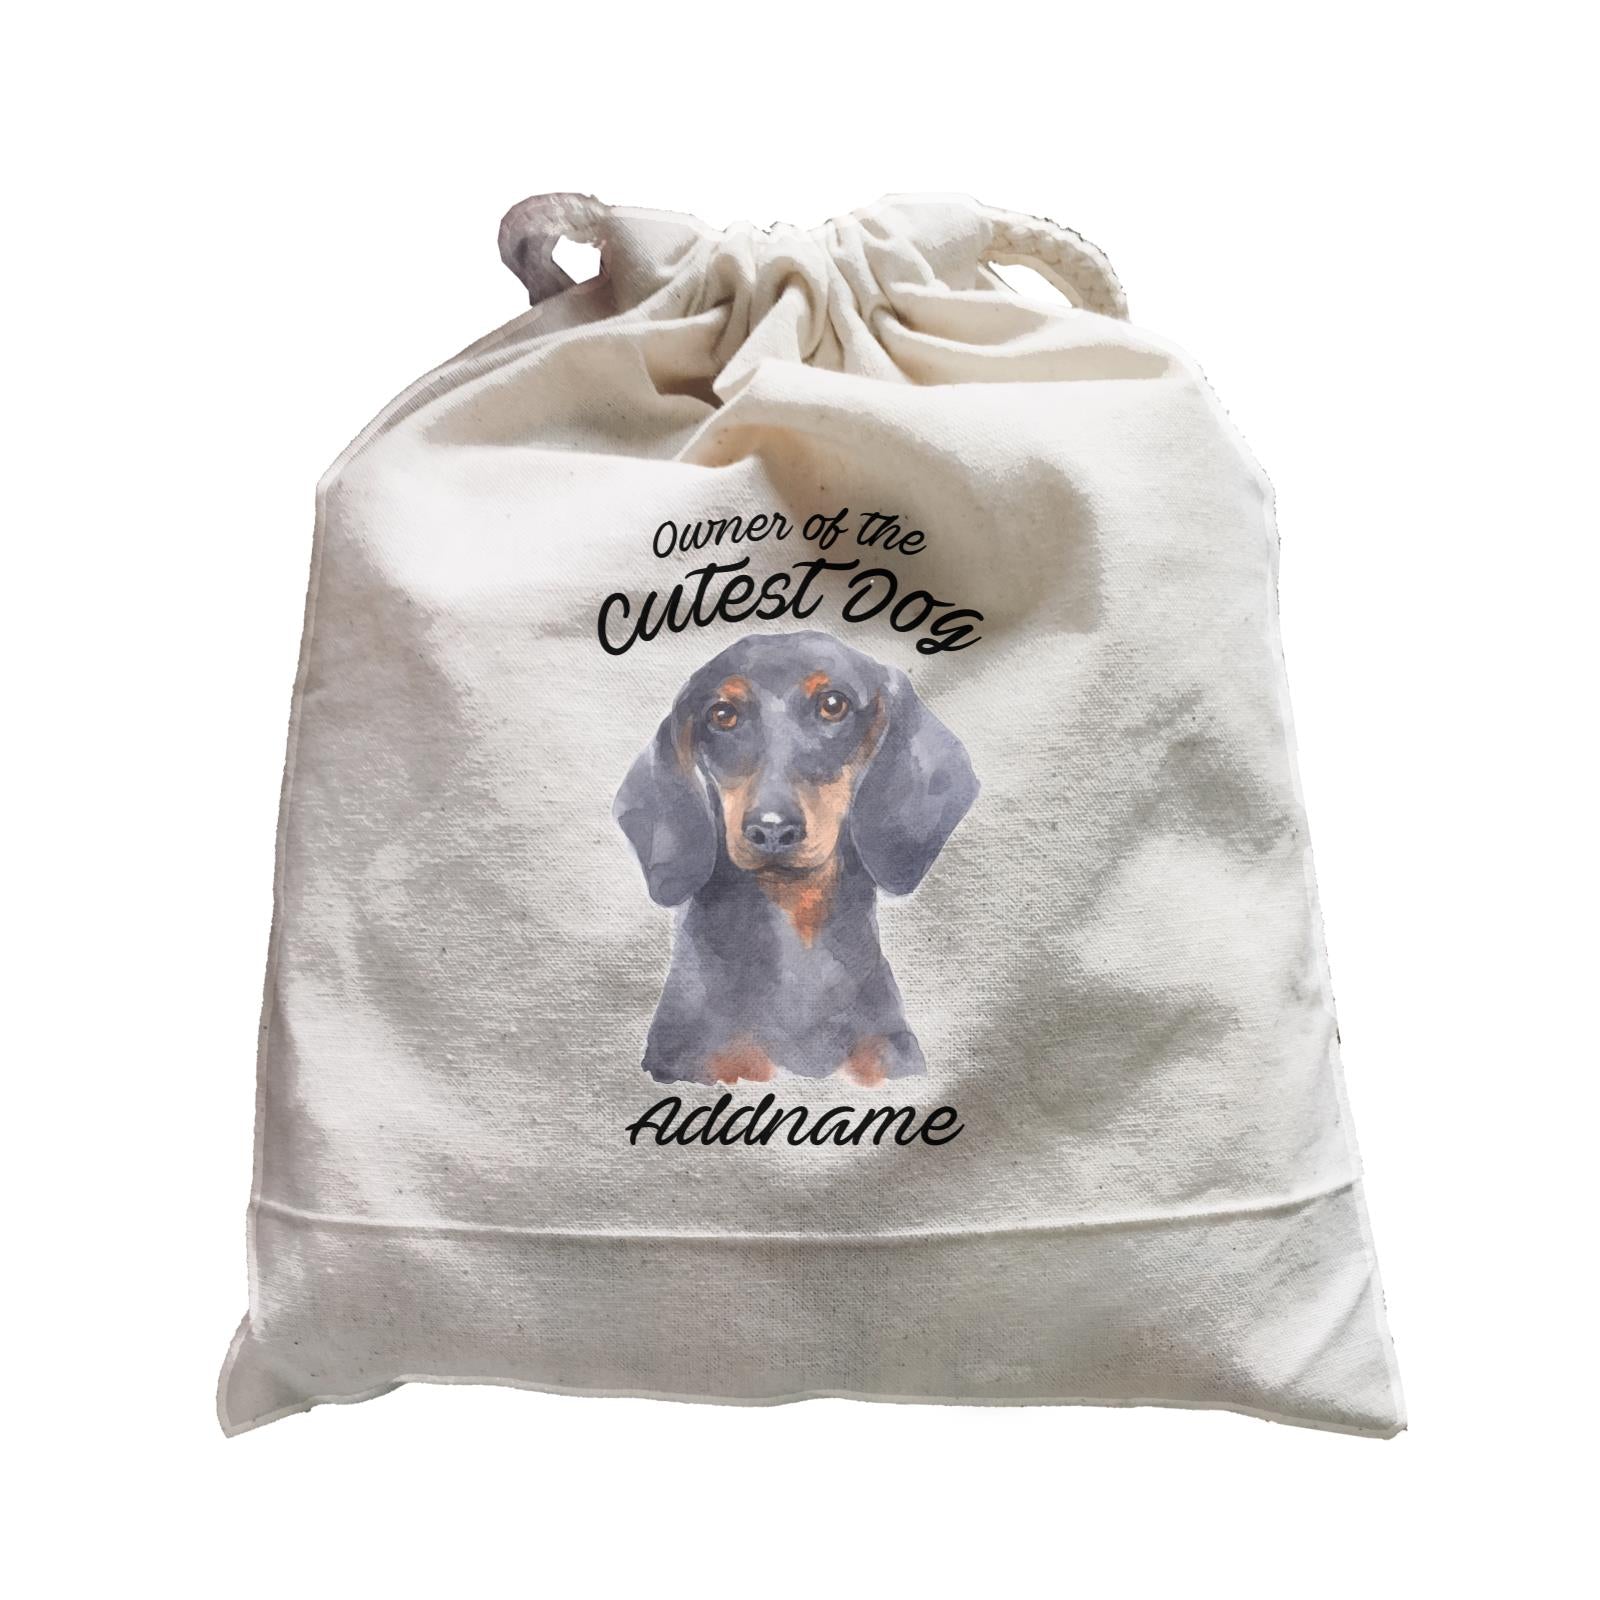 Watercolor Dog Owner Of The Cutest Dog Dachshund Addname Satchel